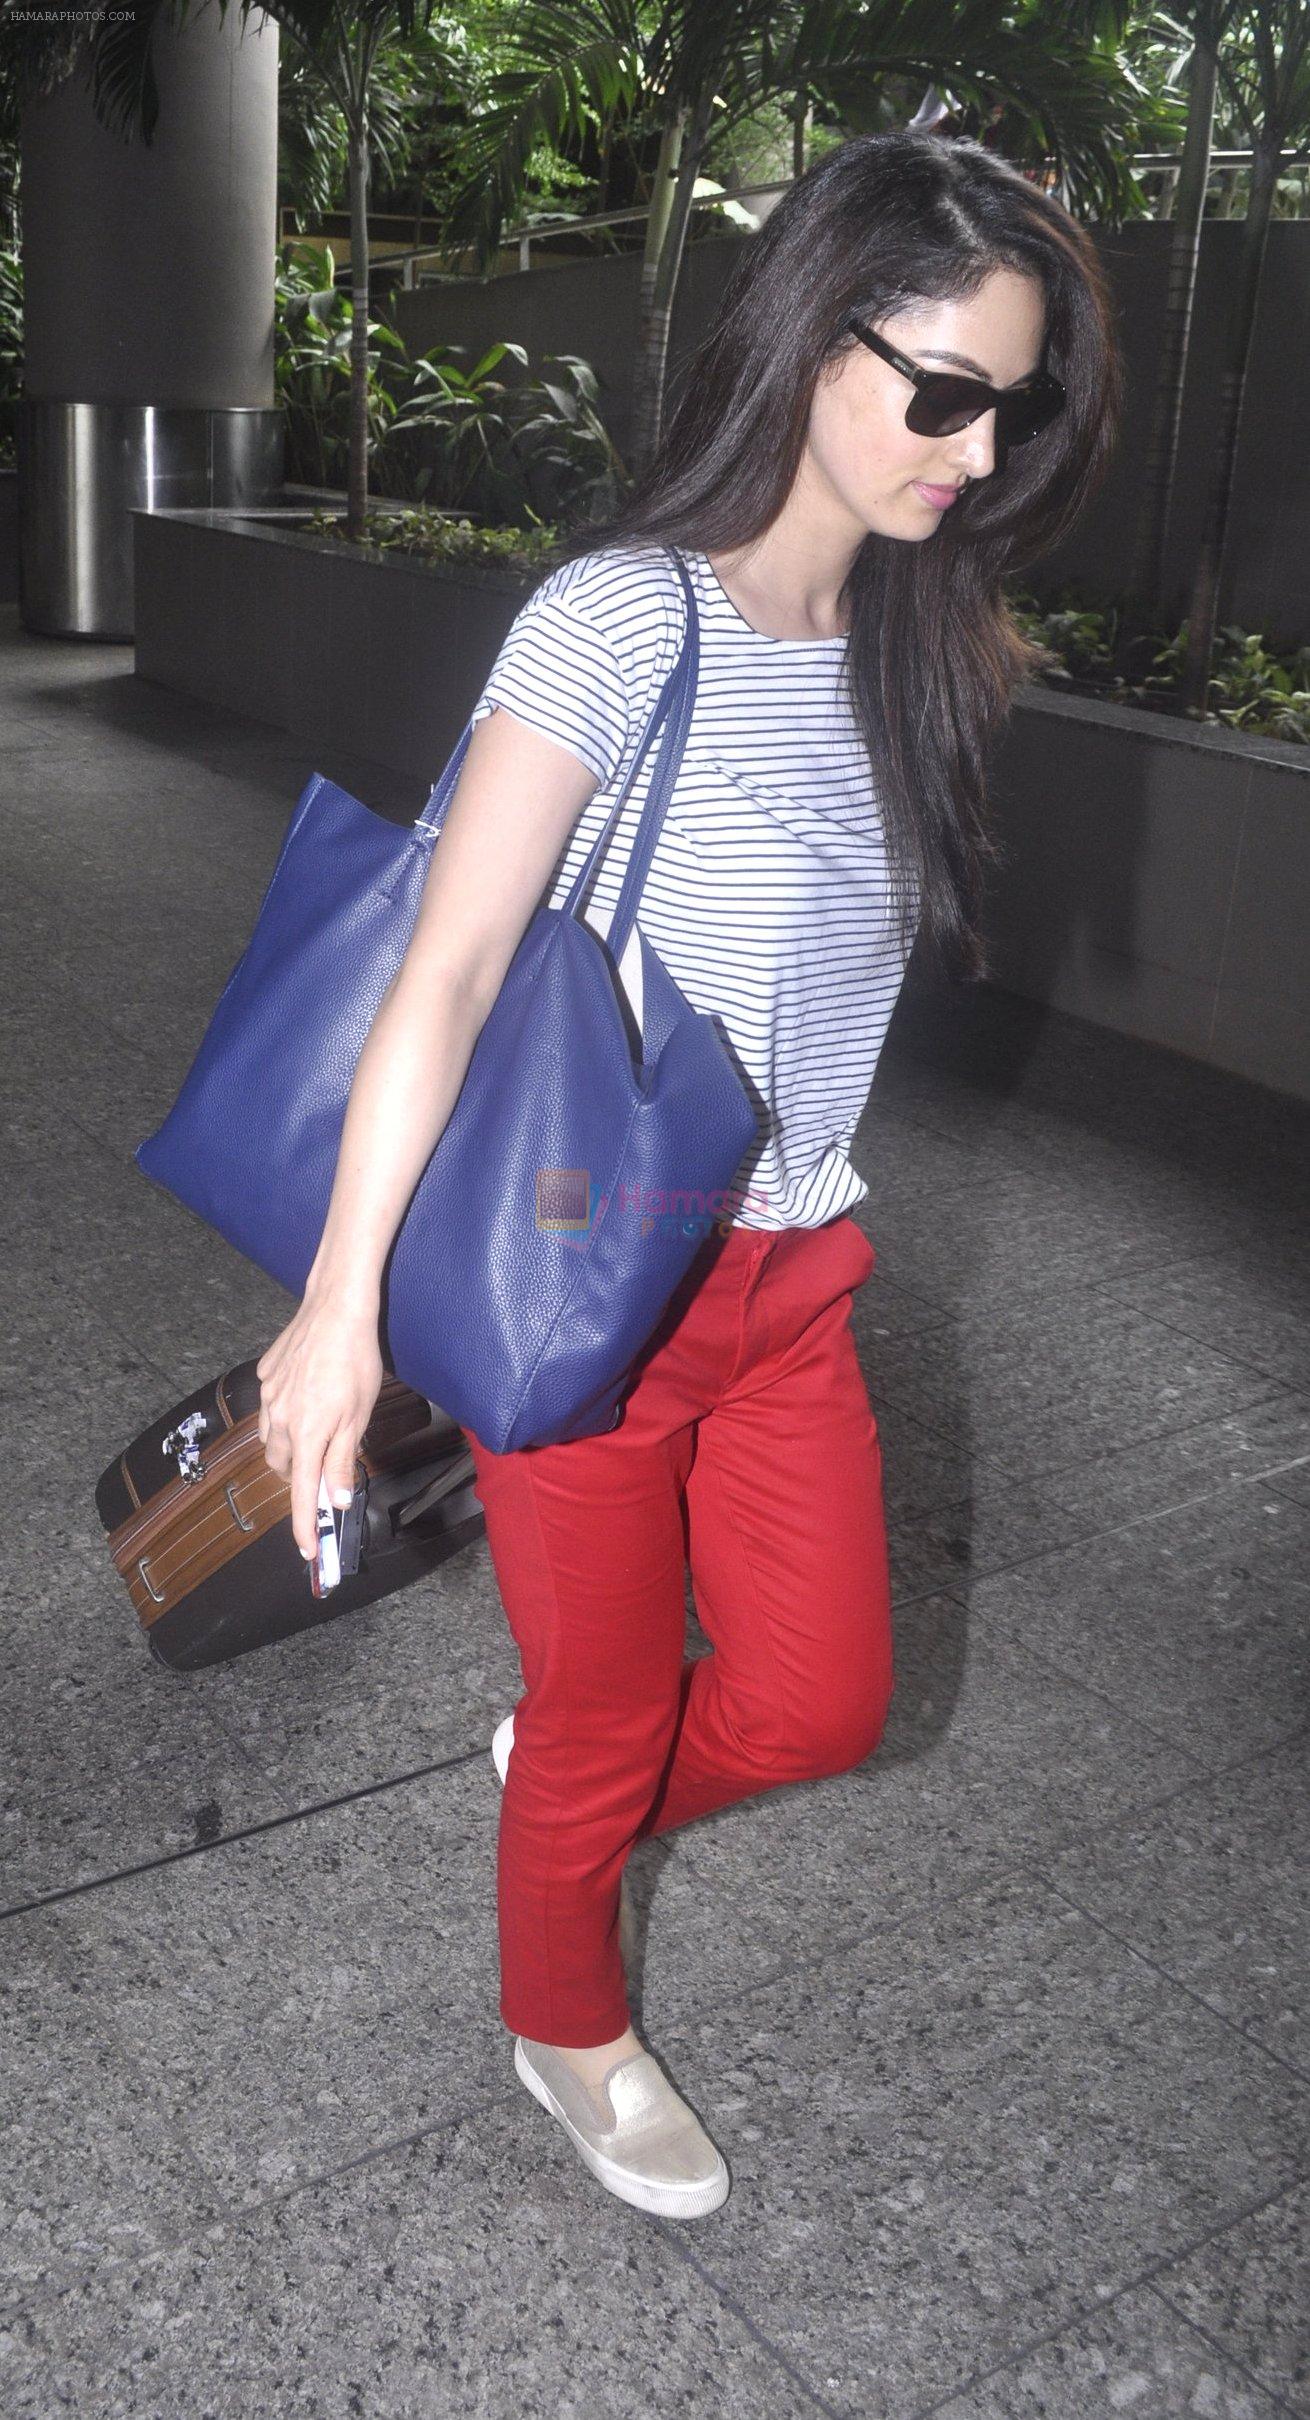 Sandeepa Dhar spotted at the airport on July 20, 2016